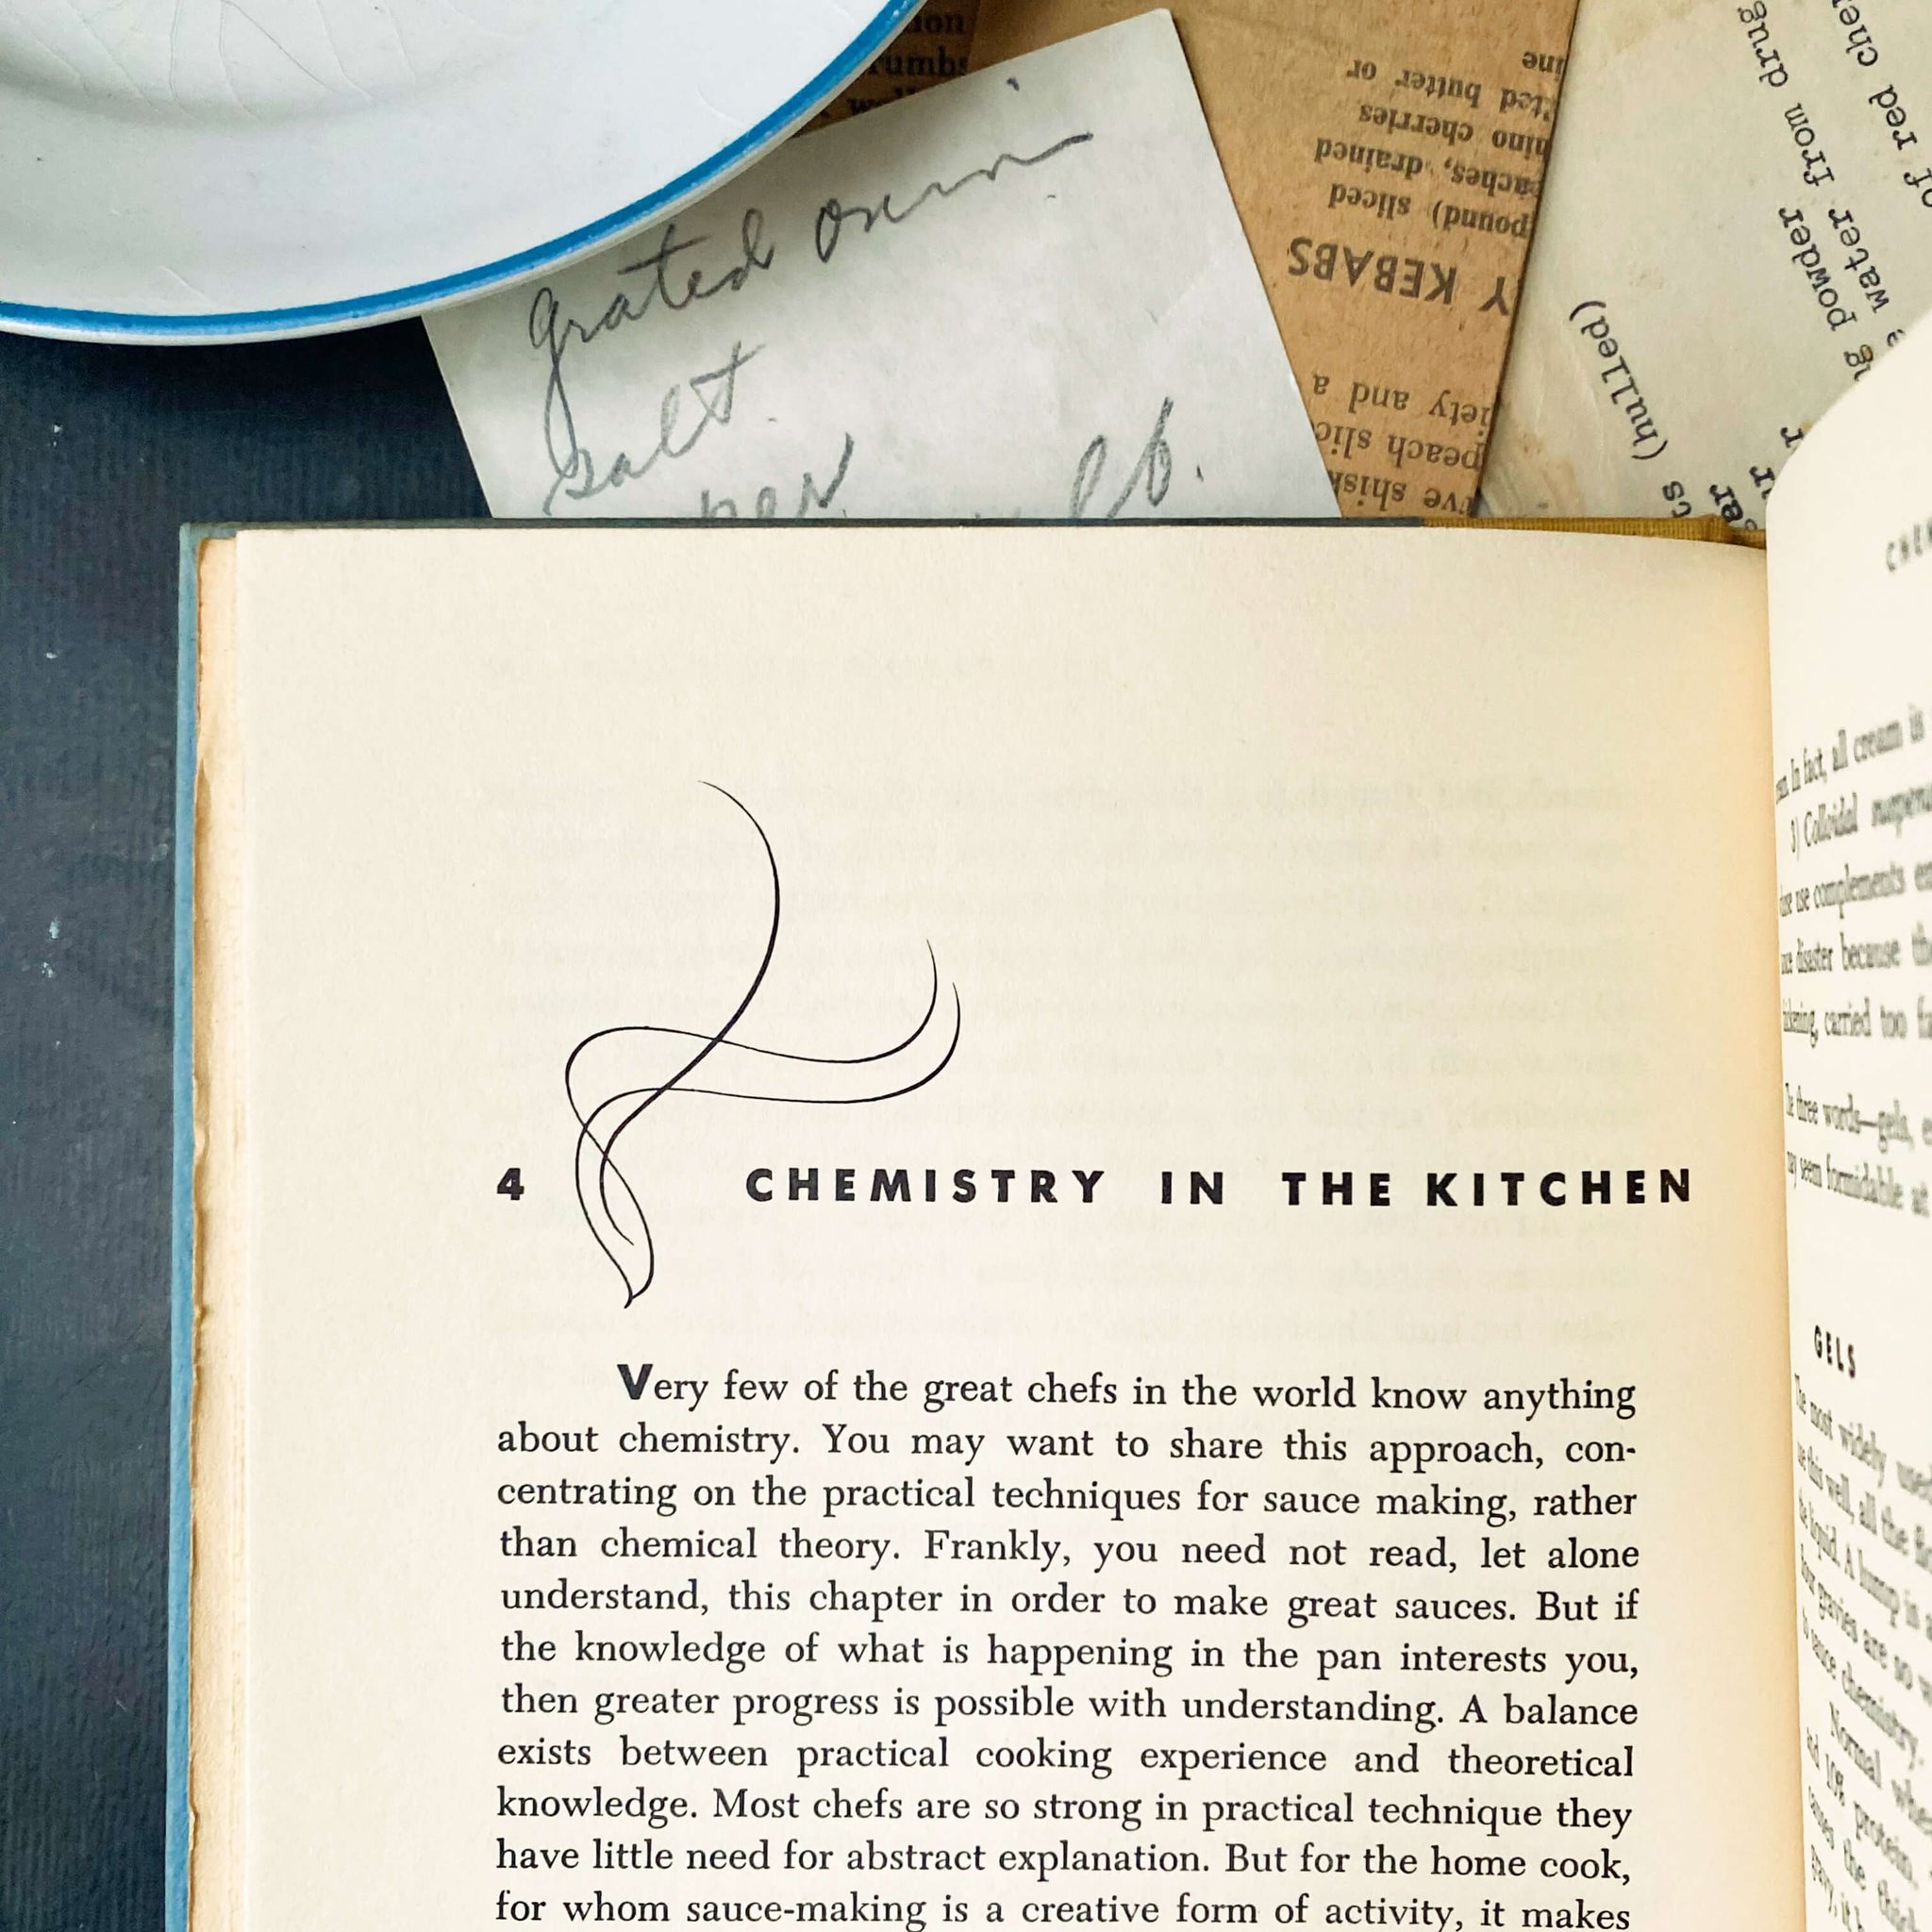 The Sauce Cook Book - Peter and Nancy Kranz - 1966 Edition